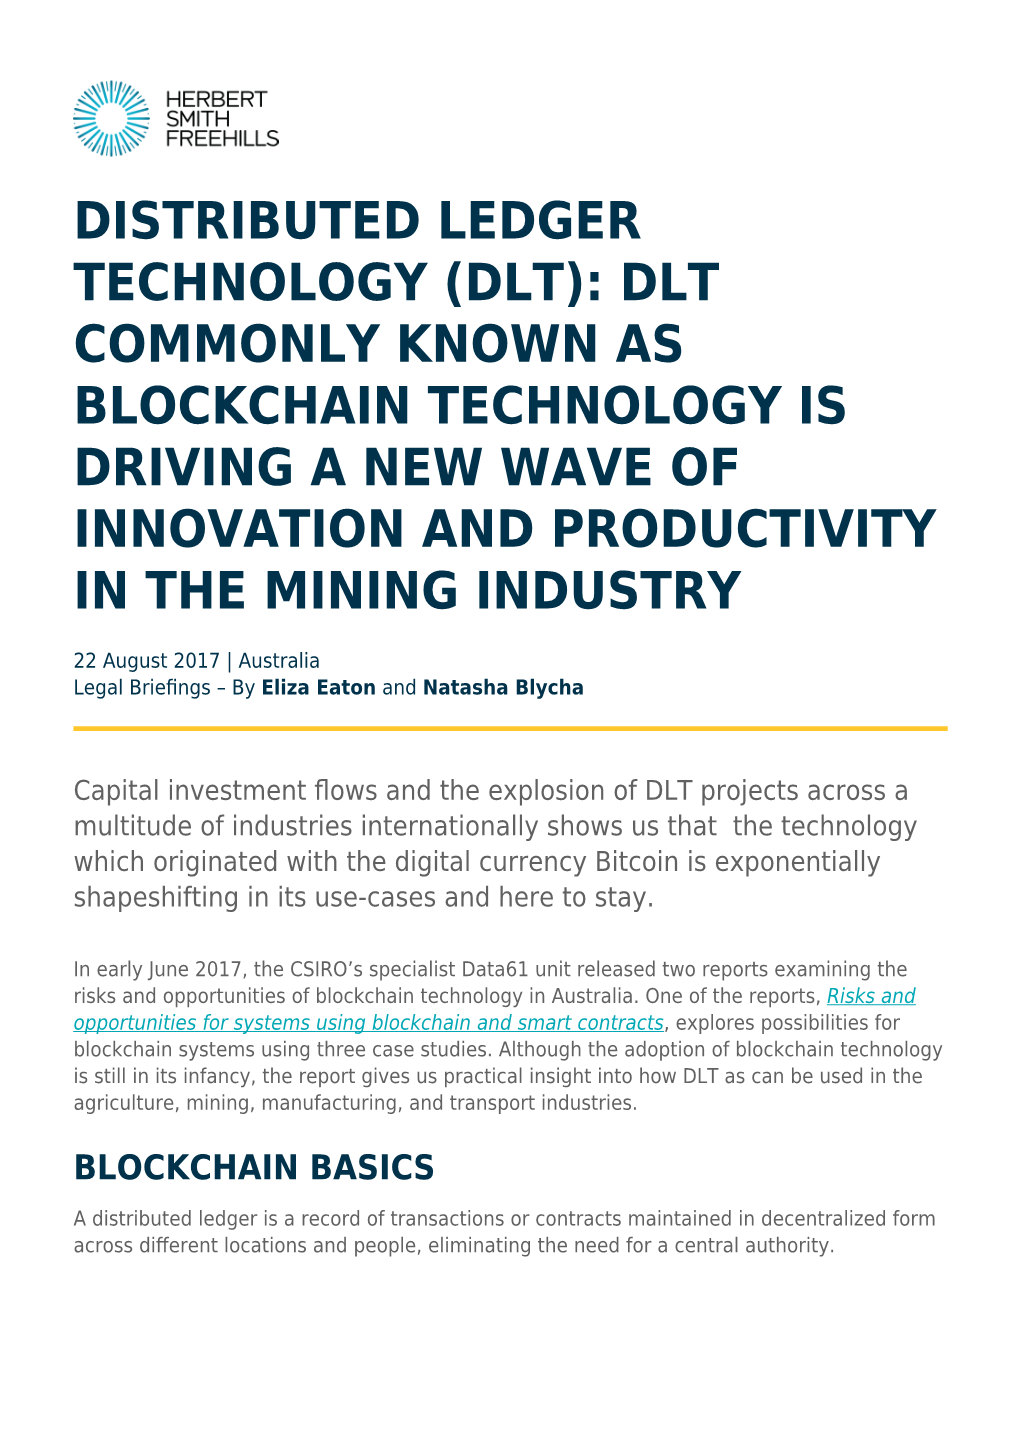 Dlt Commonly Known As Blockchain Technology Is Driving a New Wave of Innovation and Productivity in the Mining Industry